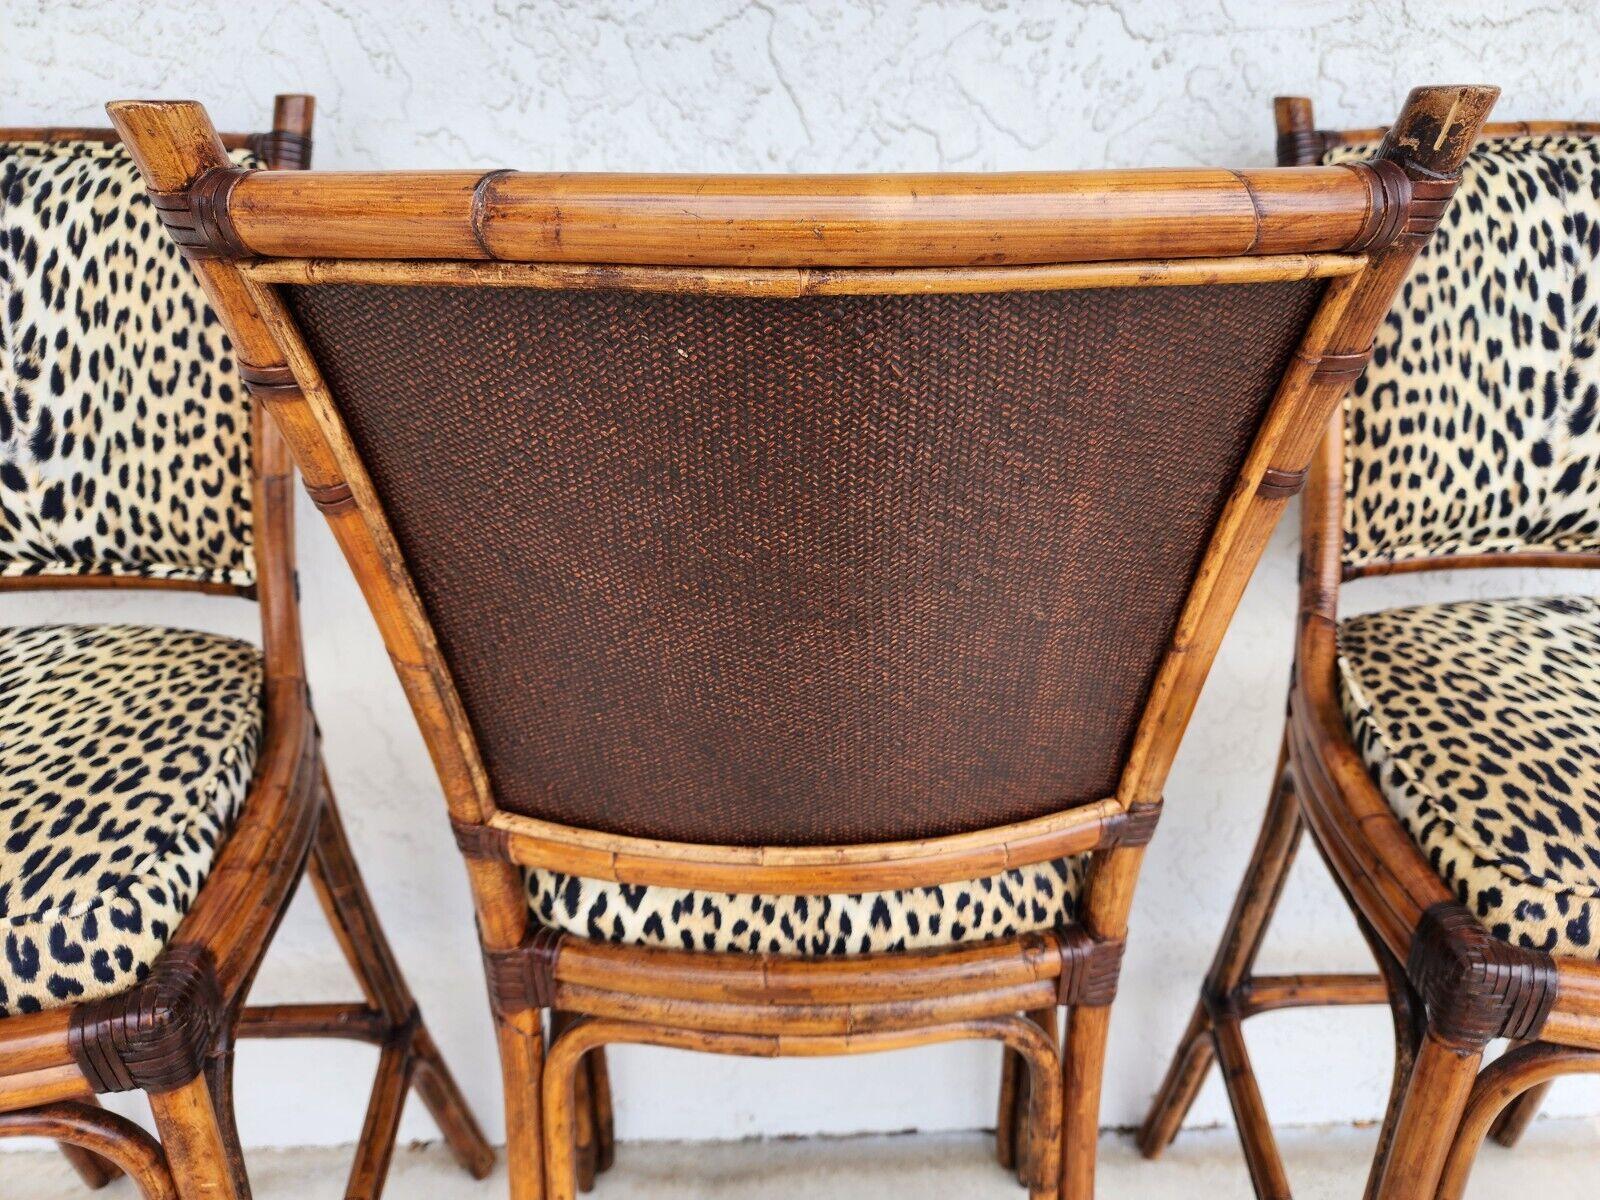 For FULL item description click on CONTINUE READING at the bottom of this page.

Offering One Of Our Recent Palm Beach Estate Fine Furniture Acquisitions Of A 
Set of 3 Bamboo Wicker & Rattan Barstools With Cheetah Leopard Fabric
These are very